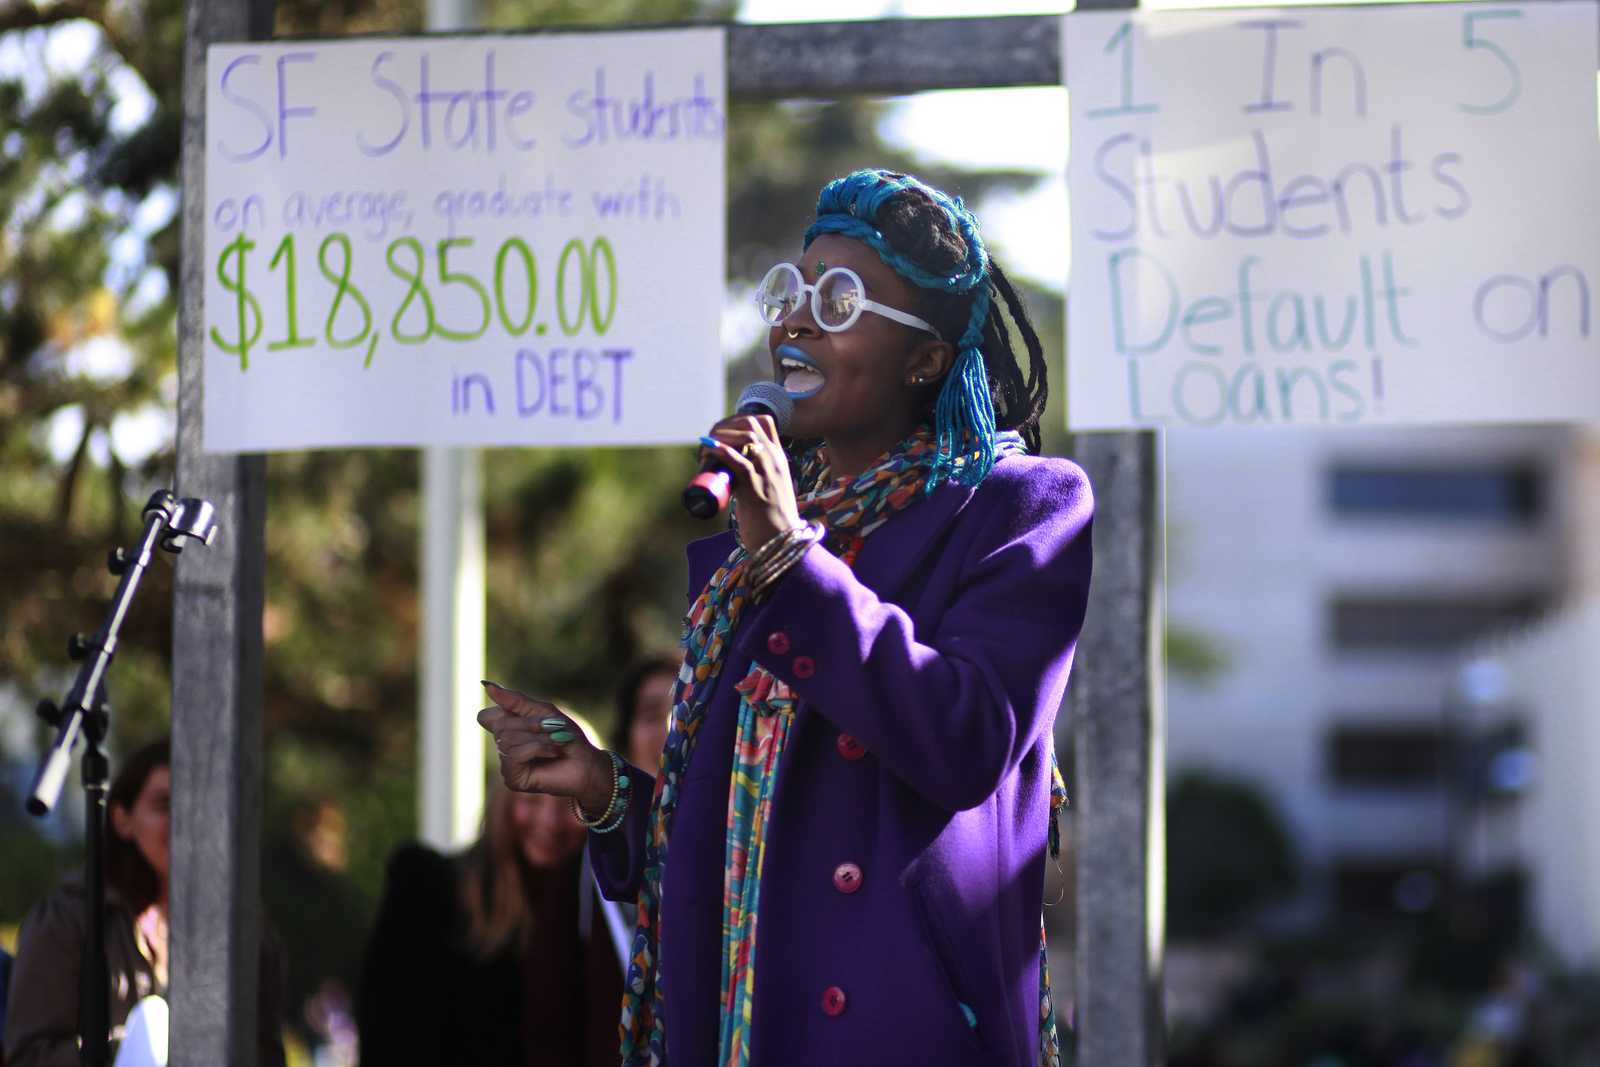 Telisa Nyoka, a recent ethnic studies graduate and TA, sings during the equity week rally at SF State in Malcolm X Plaza, Oct. 28, 2013. Her song related to the high cost of tuition and student debt. Photo by Mike Hendrickson / Xpress